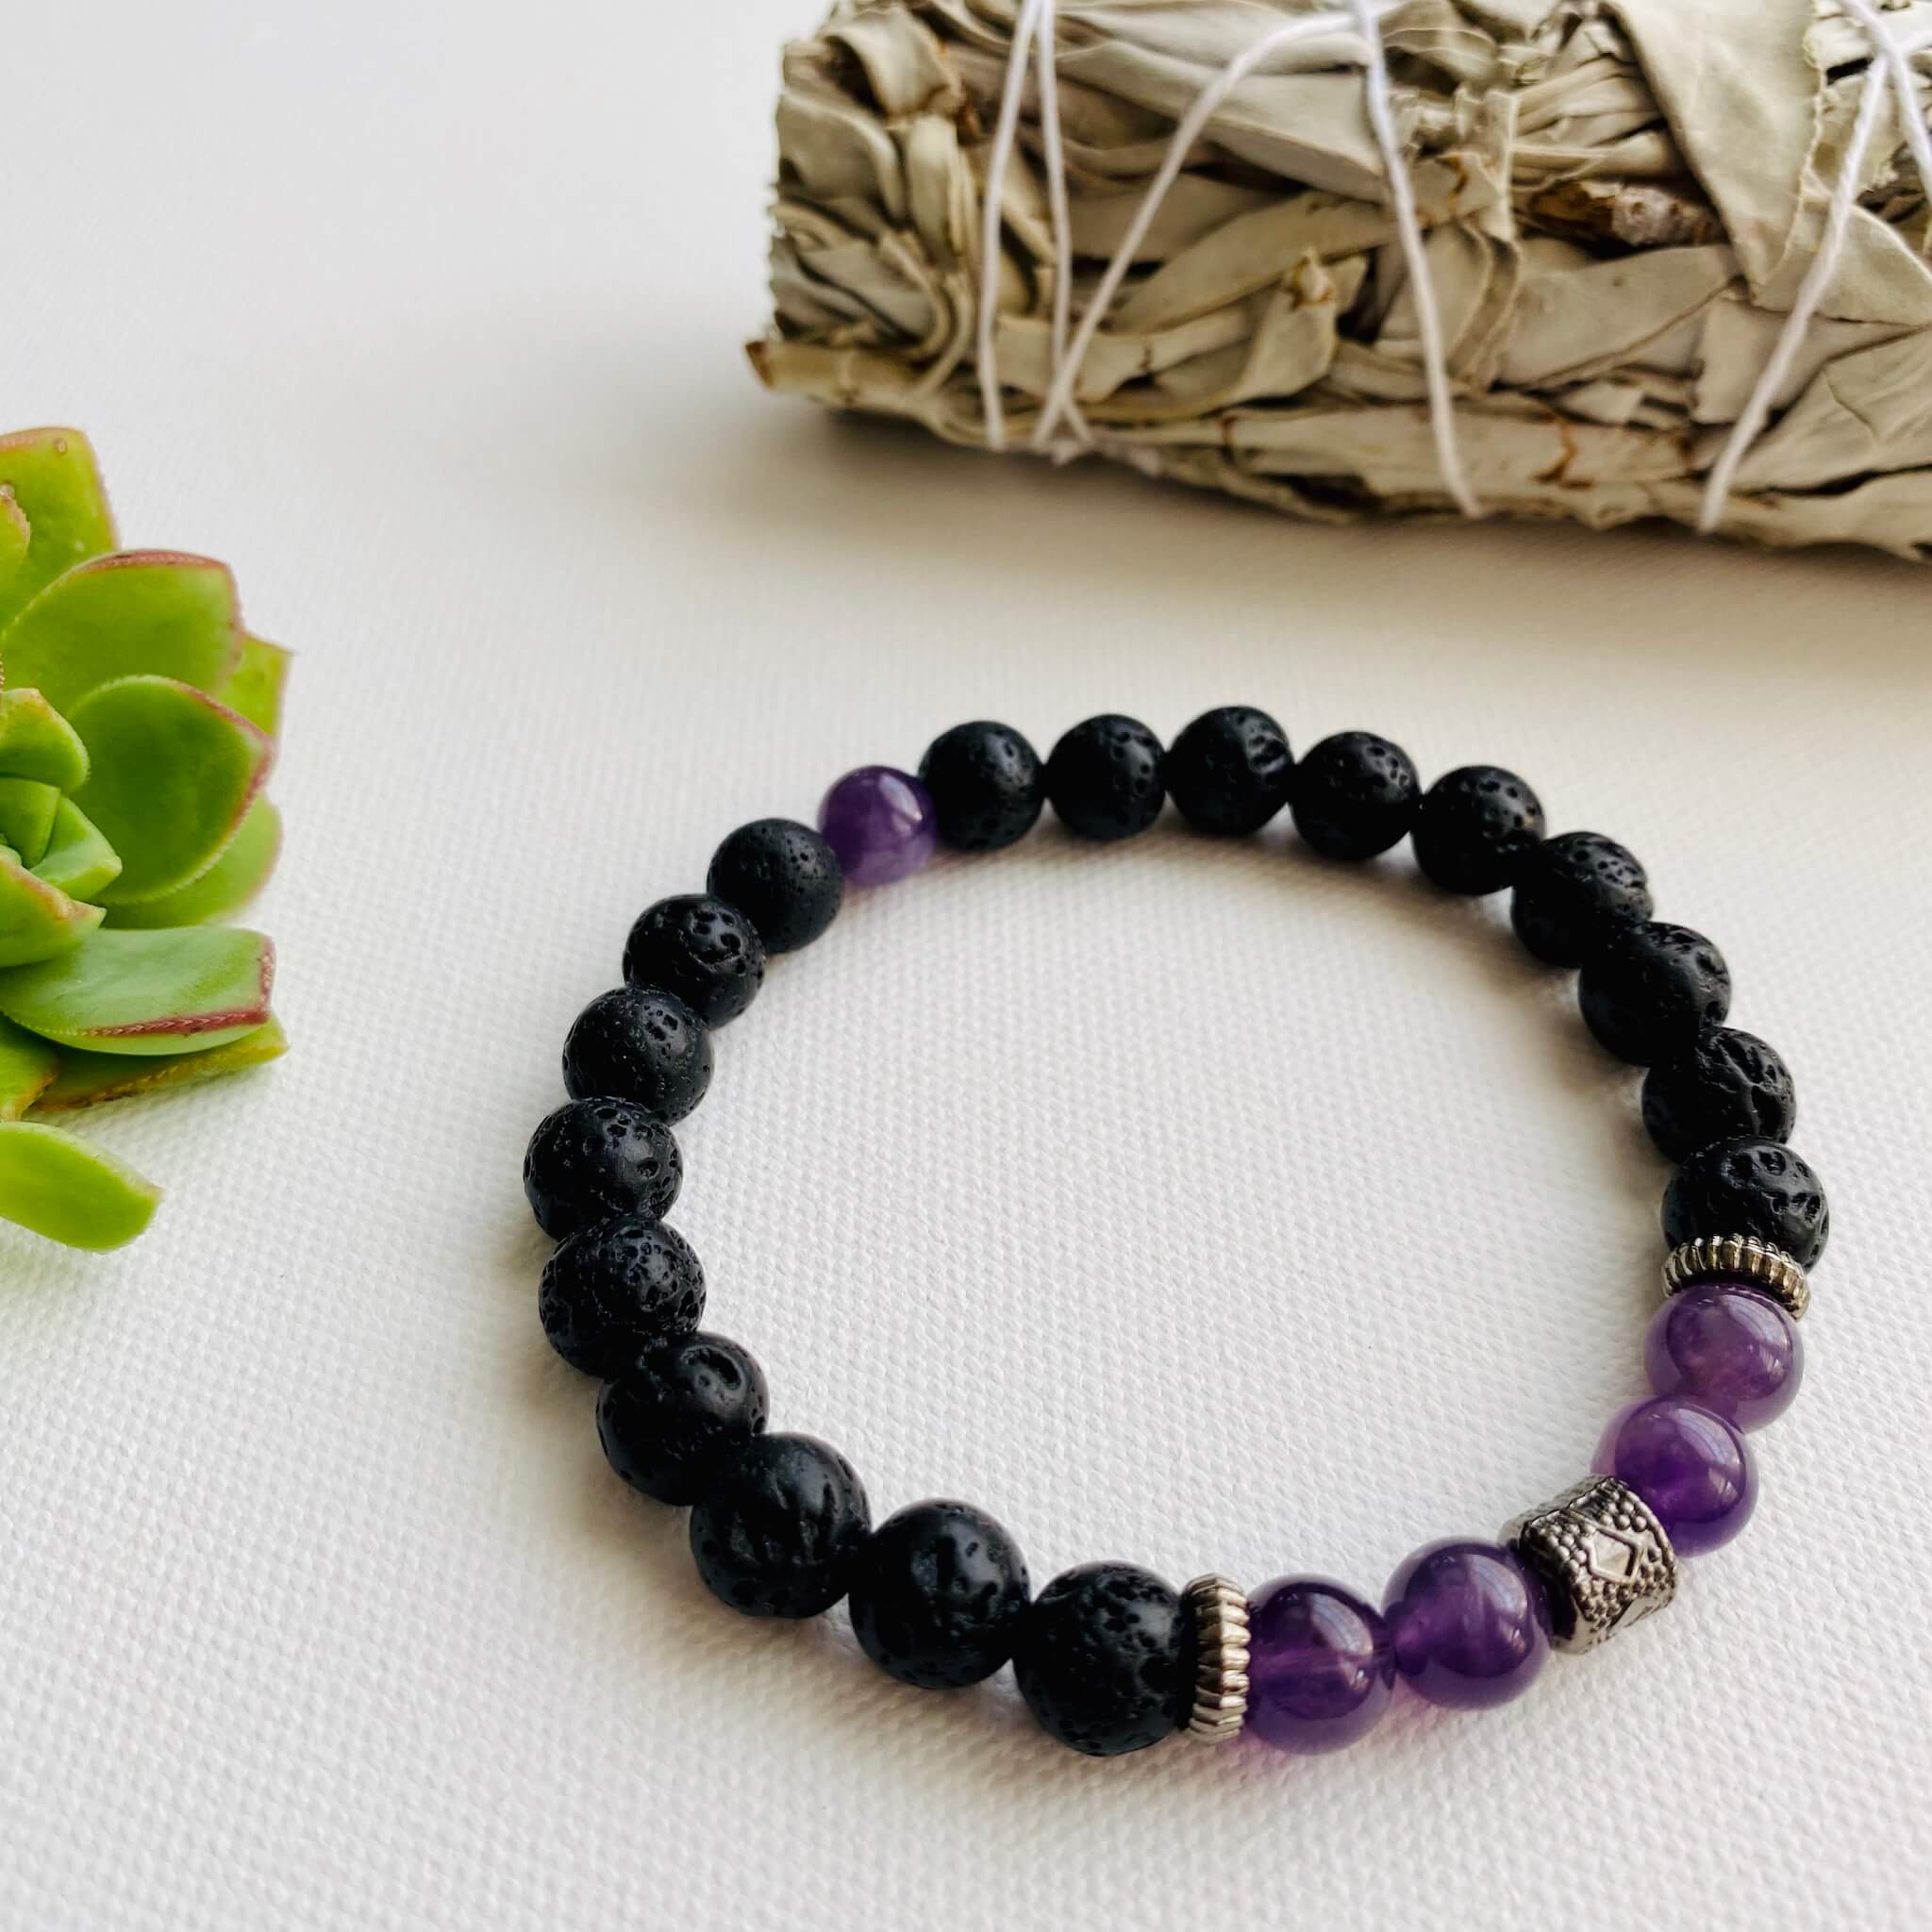 Lavender Aromatherapy Bracelet - handmade artisan jewelry with volcanic  lava stone and natural amethyst. Pair with our Organic Lavender Essential  Oil.